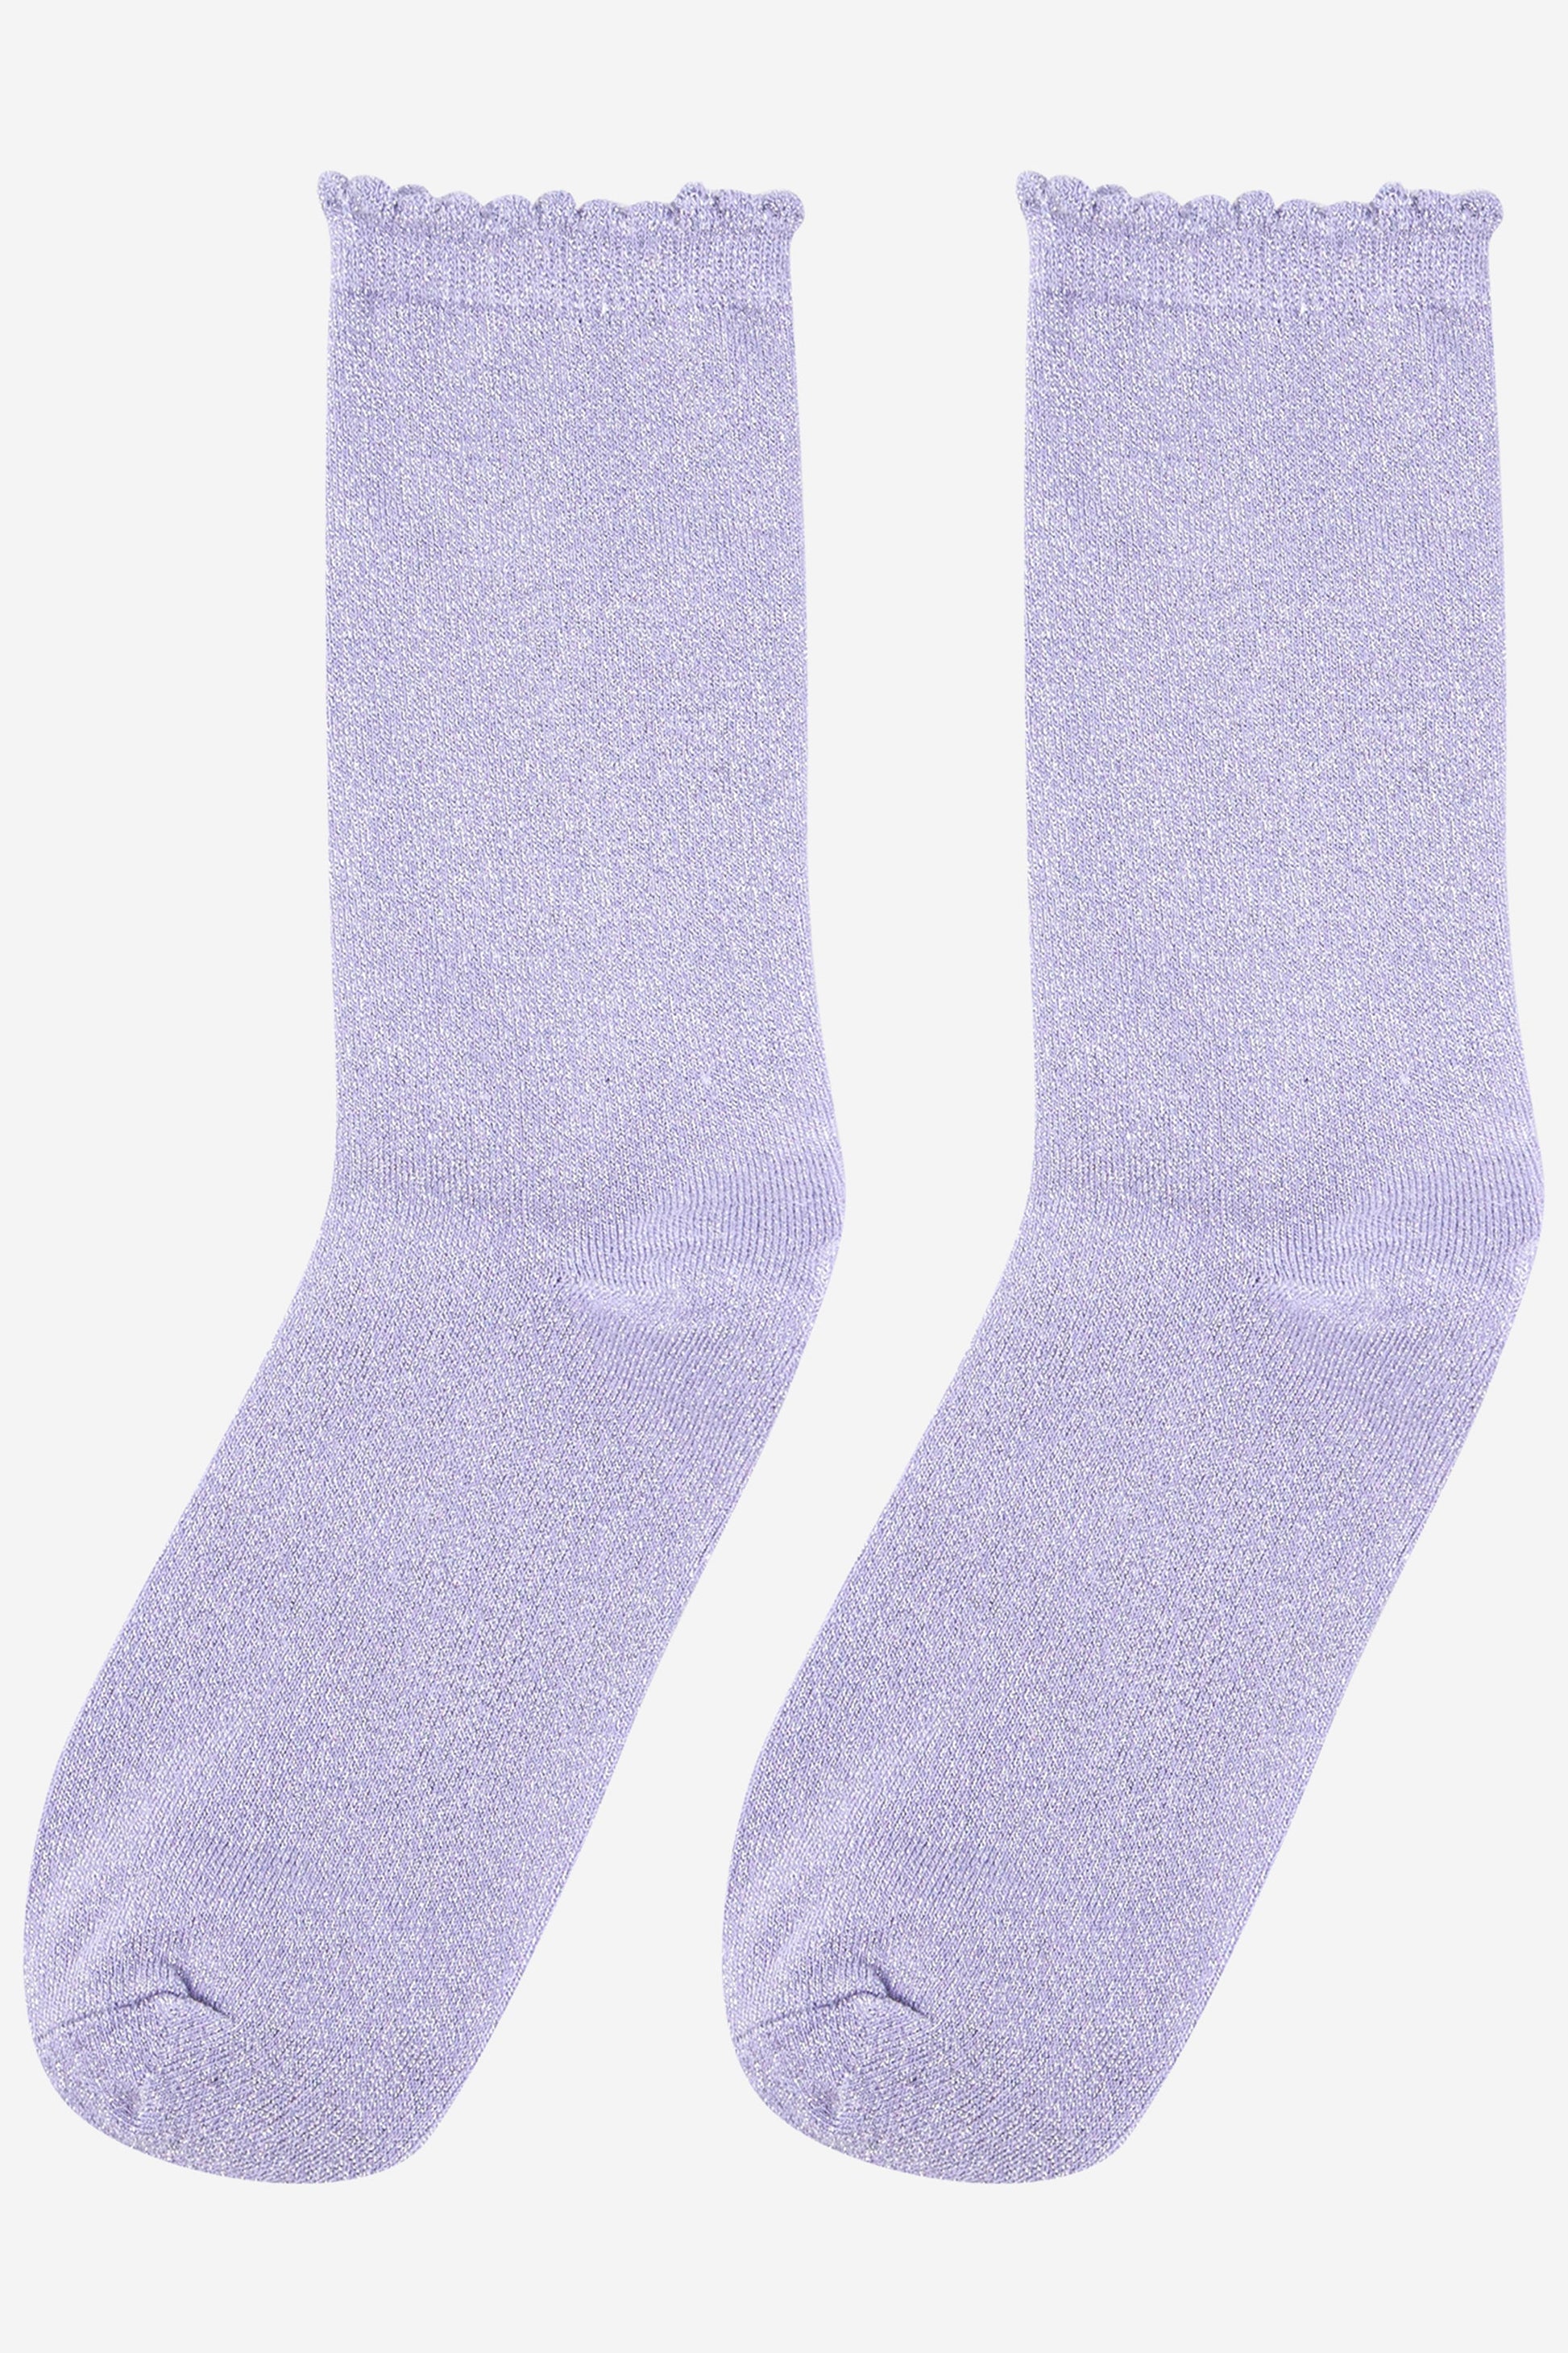 lilac sparkly glitter socks with scalloped cuffs and an all over shimmer